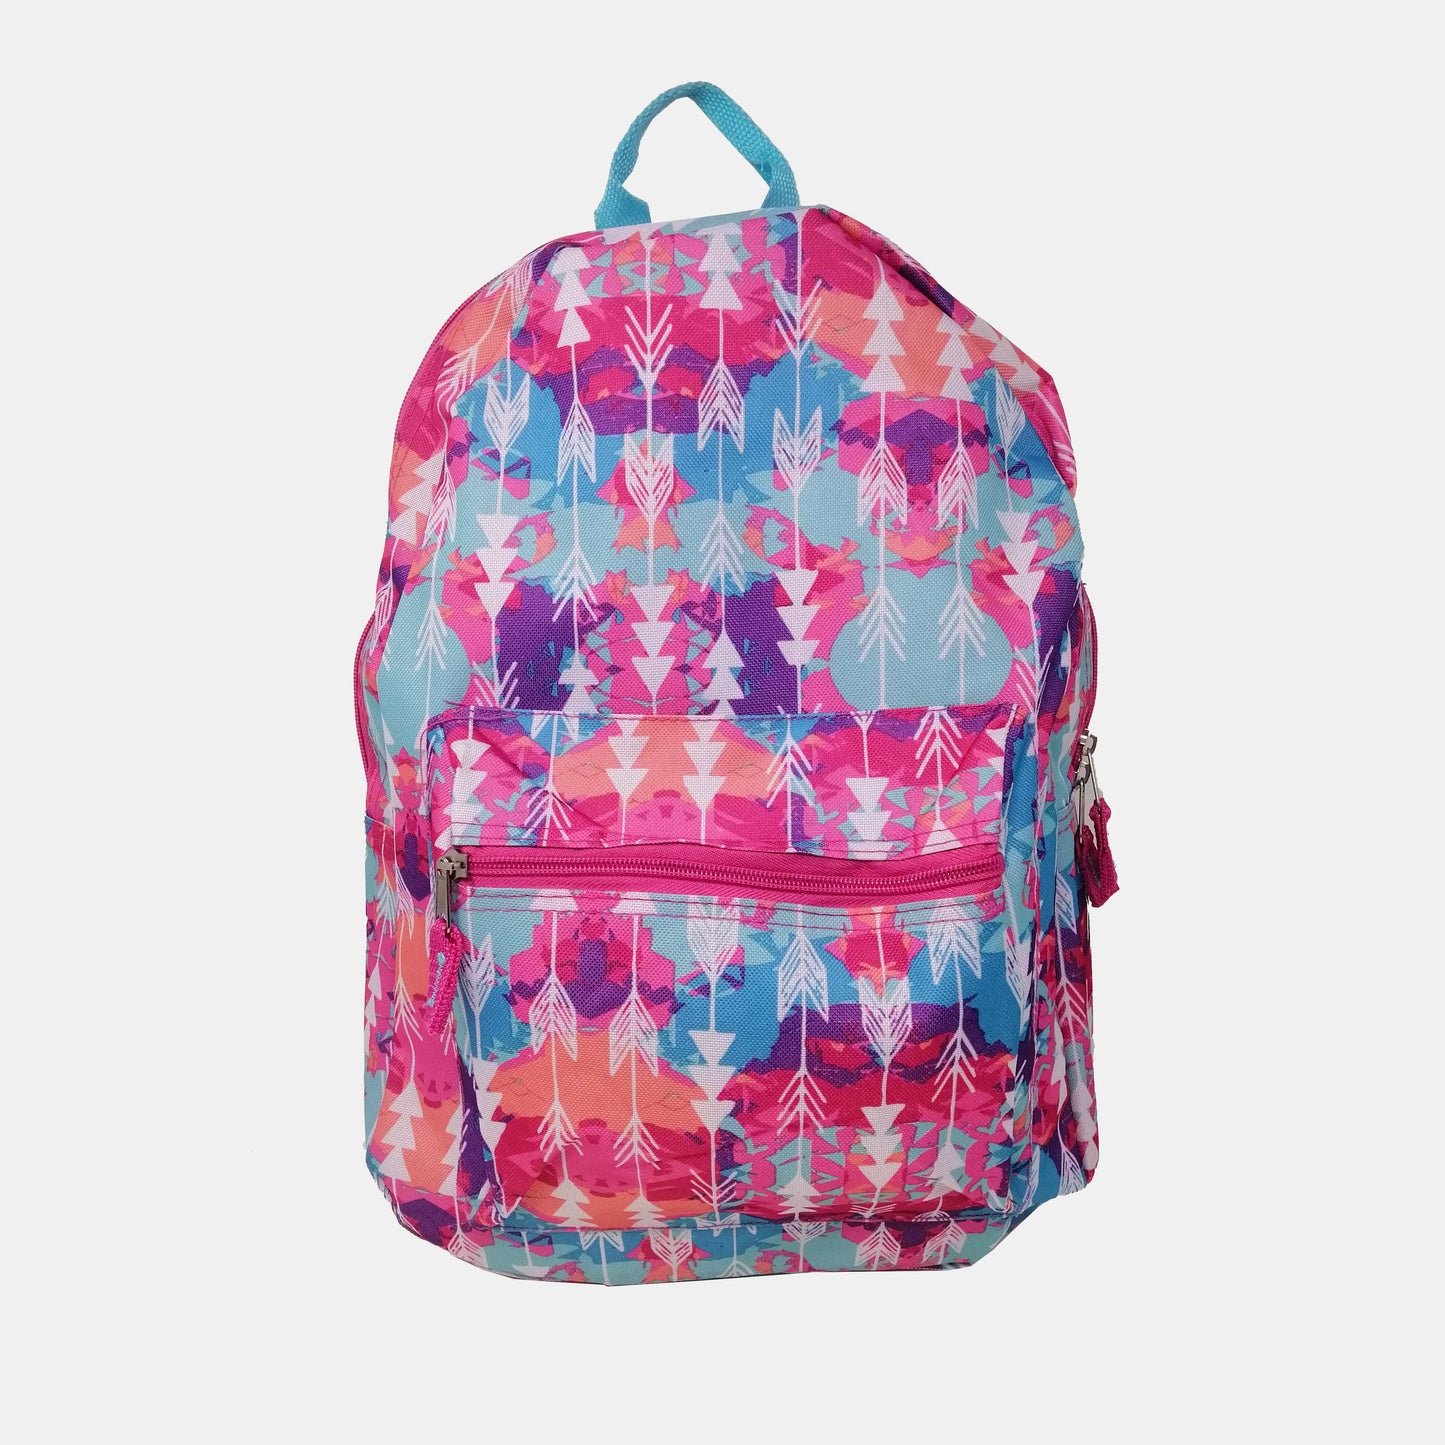 CITY STROTS Backpacks & Luggage 44cm x 30cm / Multi-Color CITY STROTS - Printed Backpack